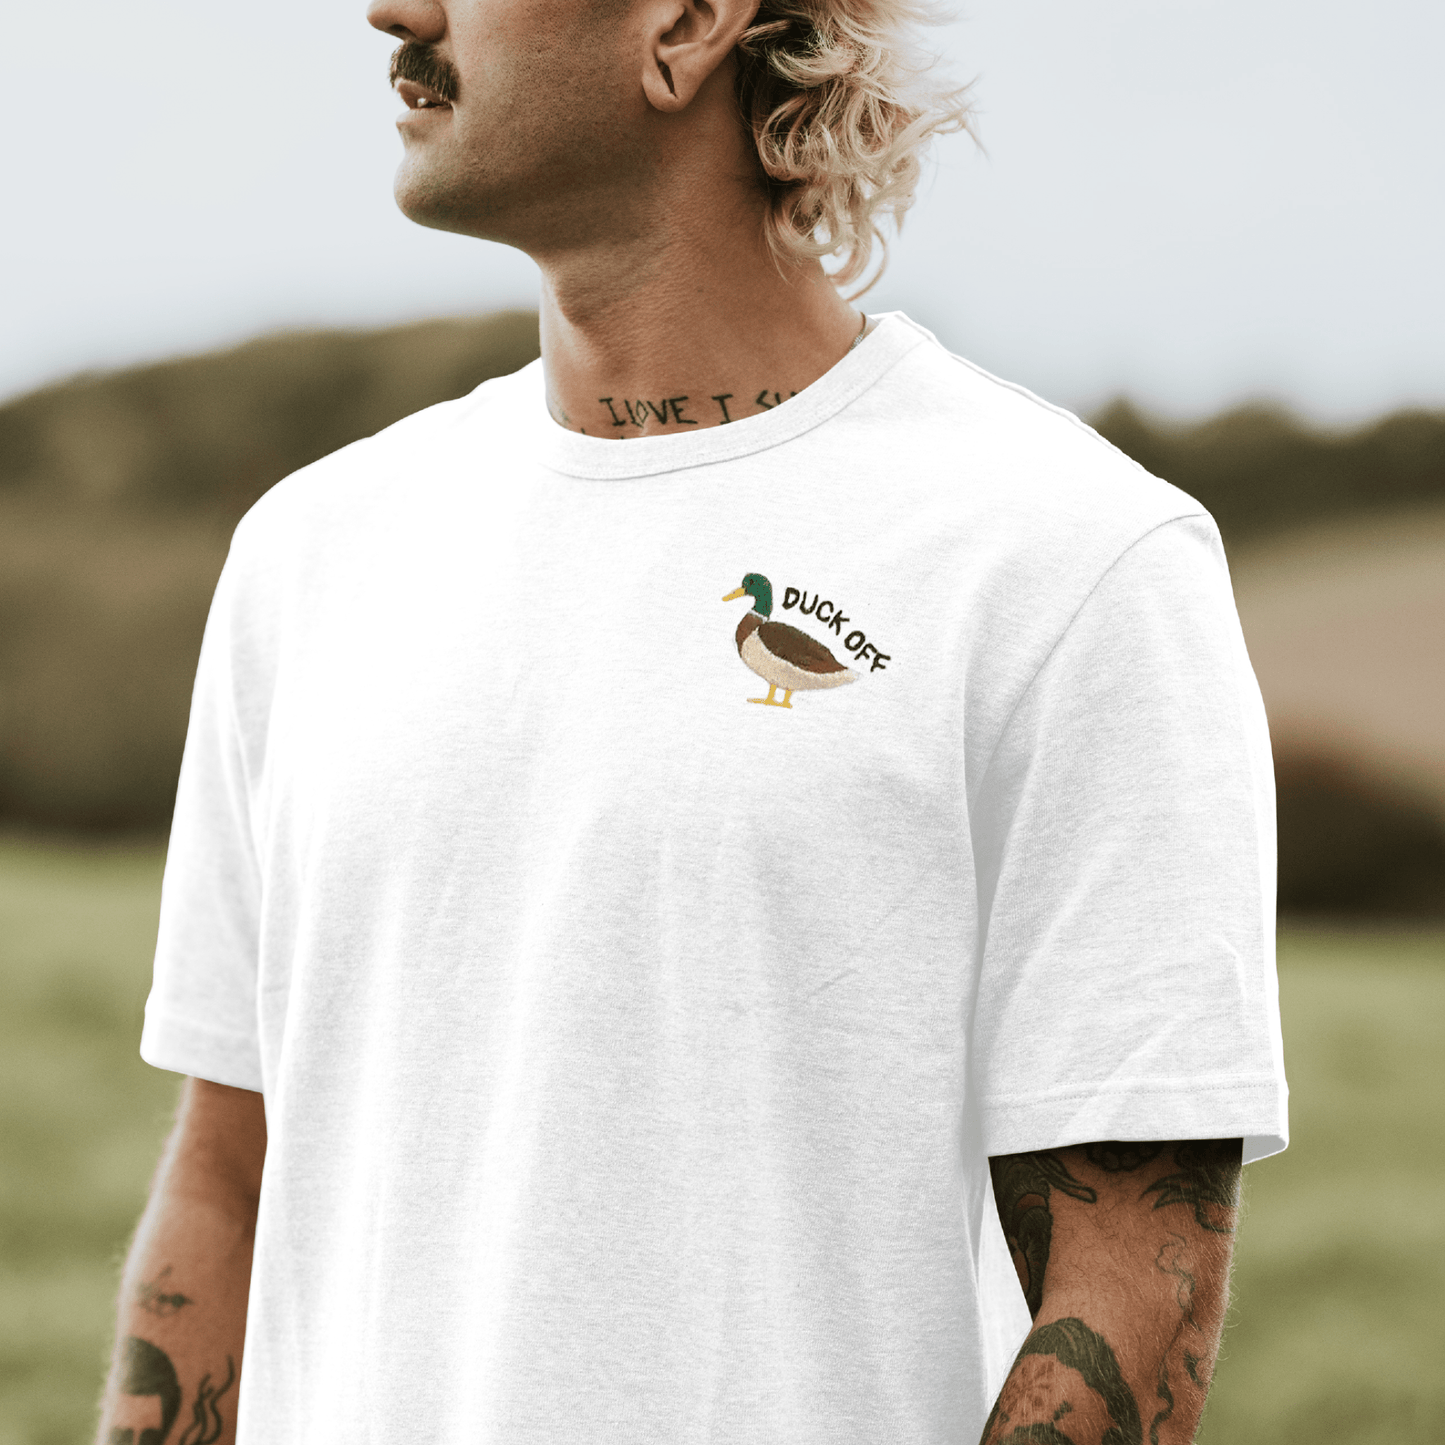 Duck off embroidered T-shirt